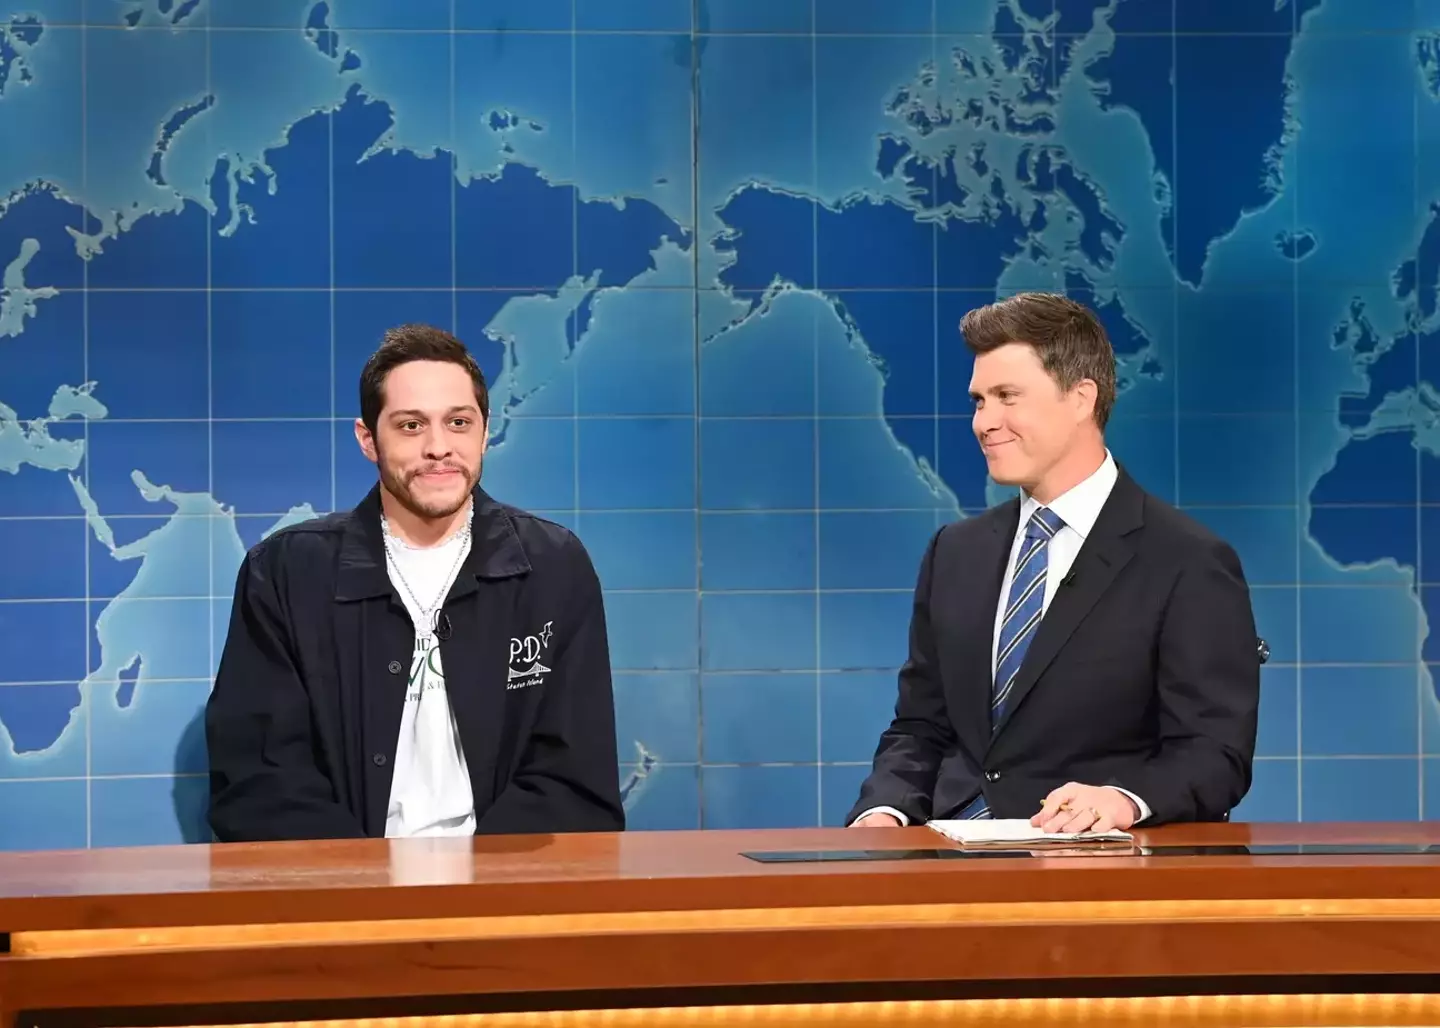 Pete Davidson's return to Saturday Night Live has just been cancelled.